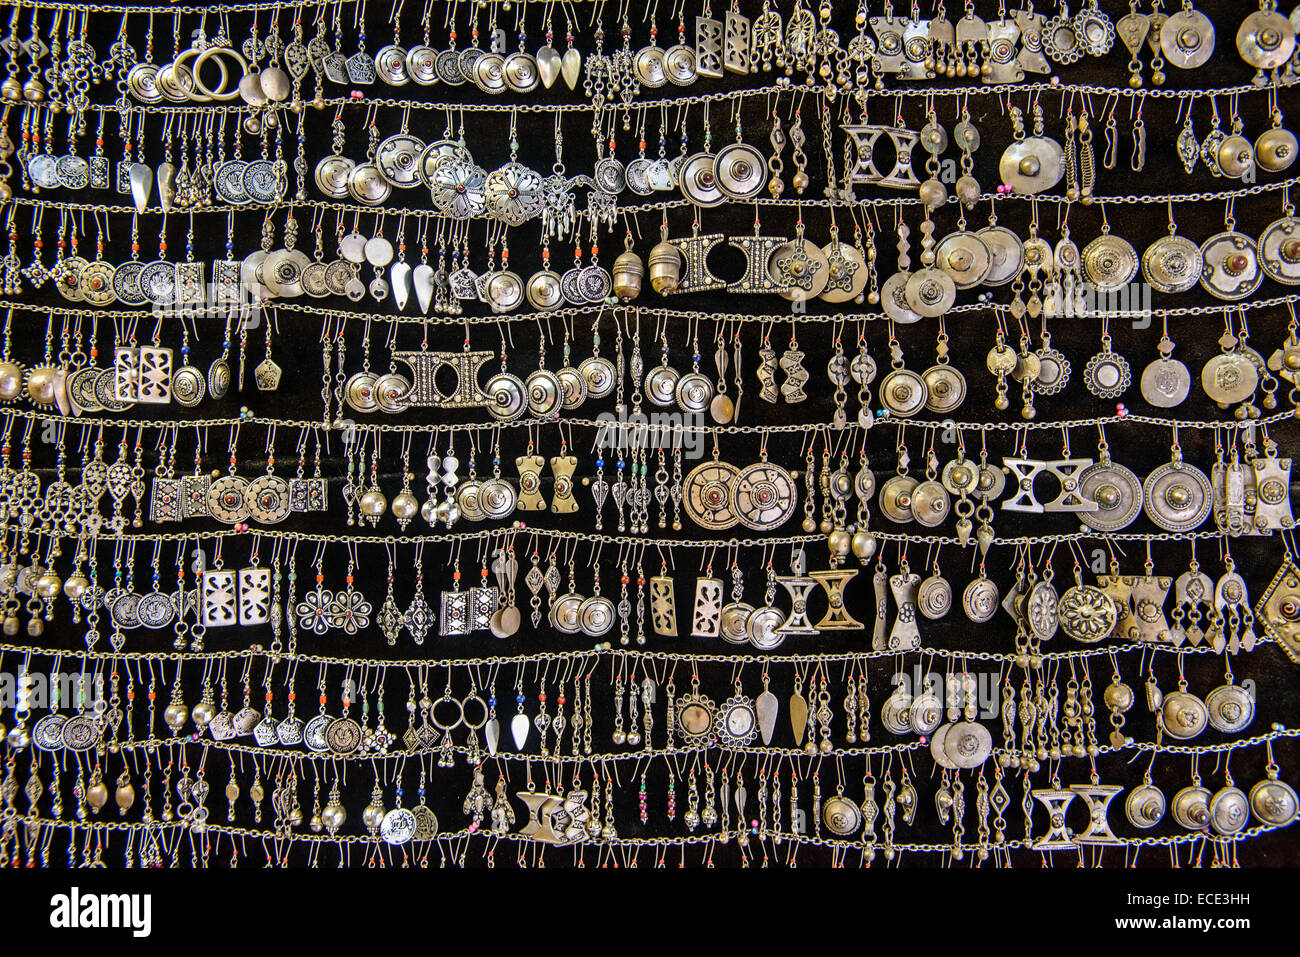 Silver and gold earrings for sale, Sana'a, Yemen Stock Photo